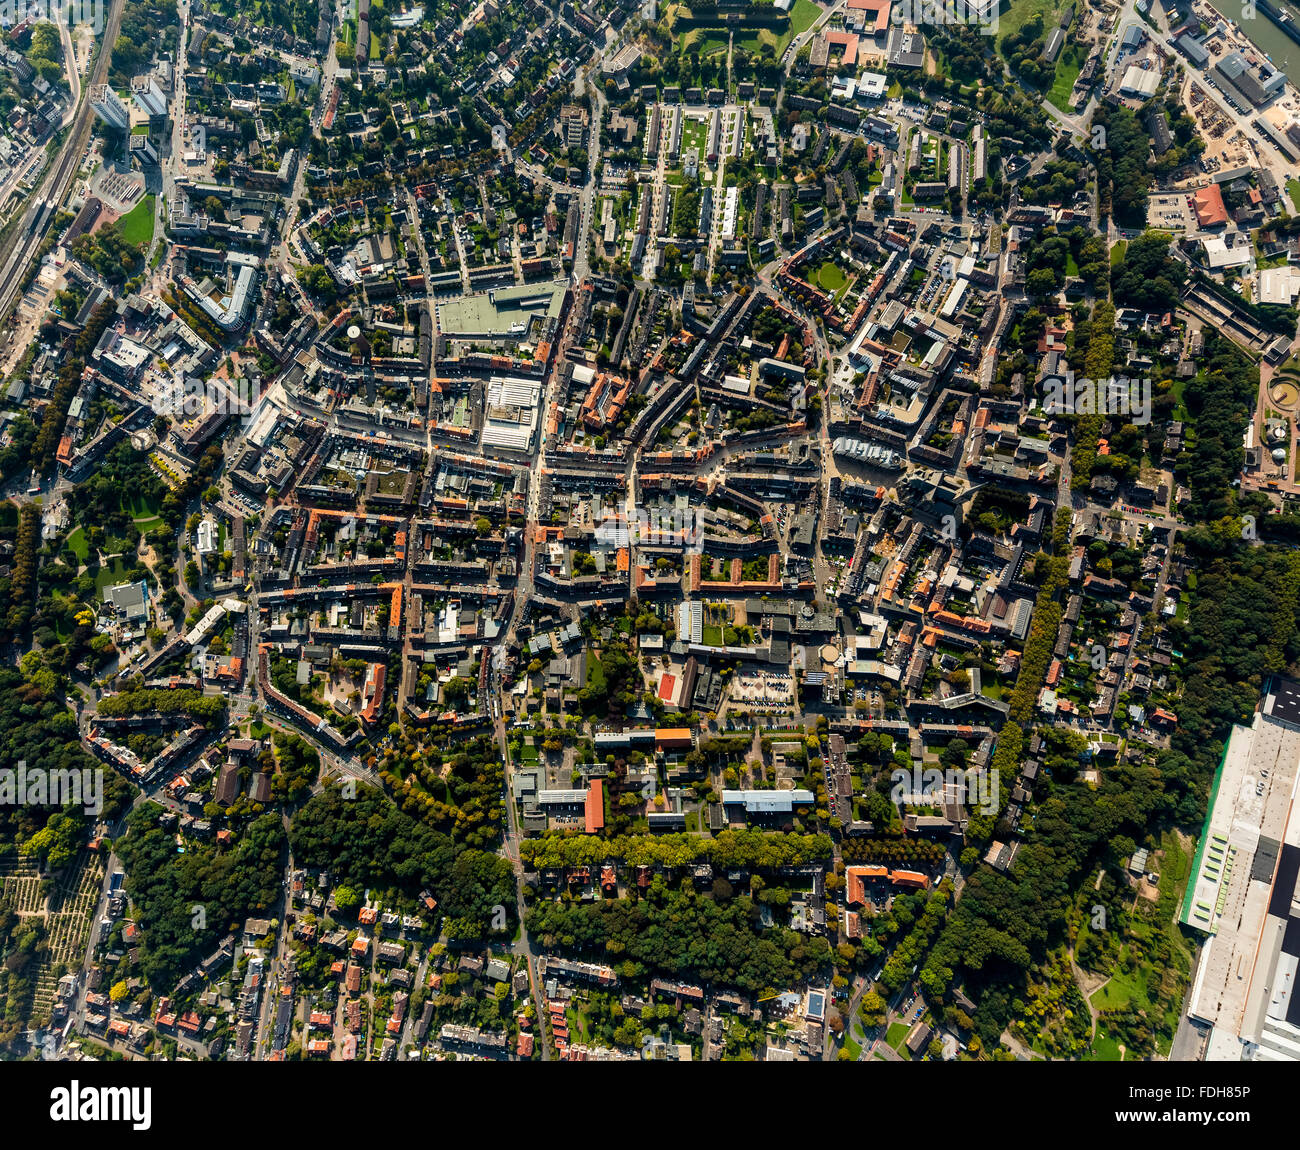 Aerial view, Round downtown plan, overviews of Wesel, historic city center of Wesel, Wesel, Rhineland, North Rhine-Westphalia, Stock Photo